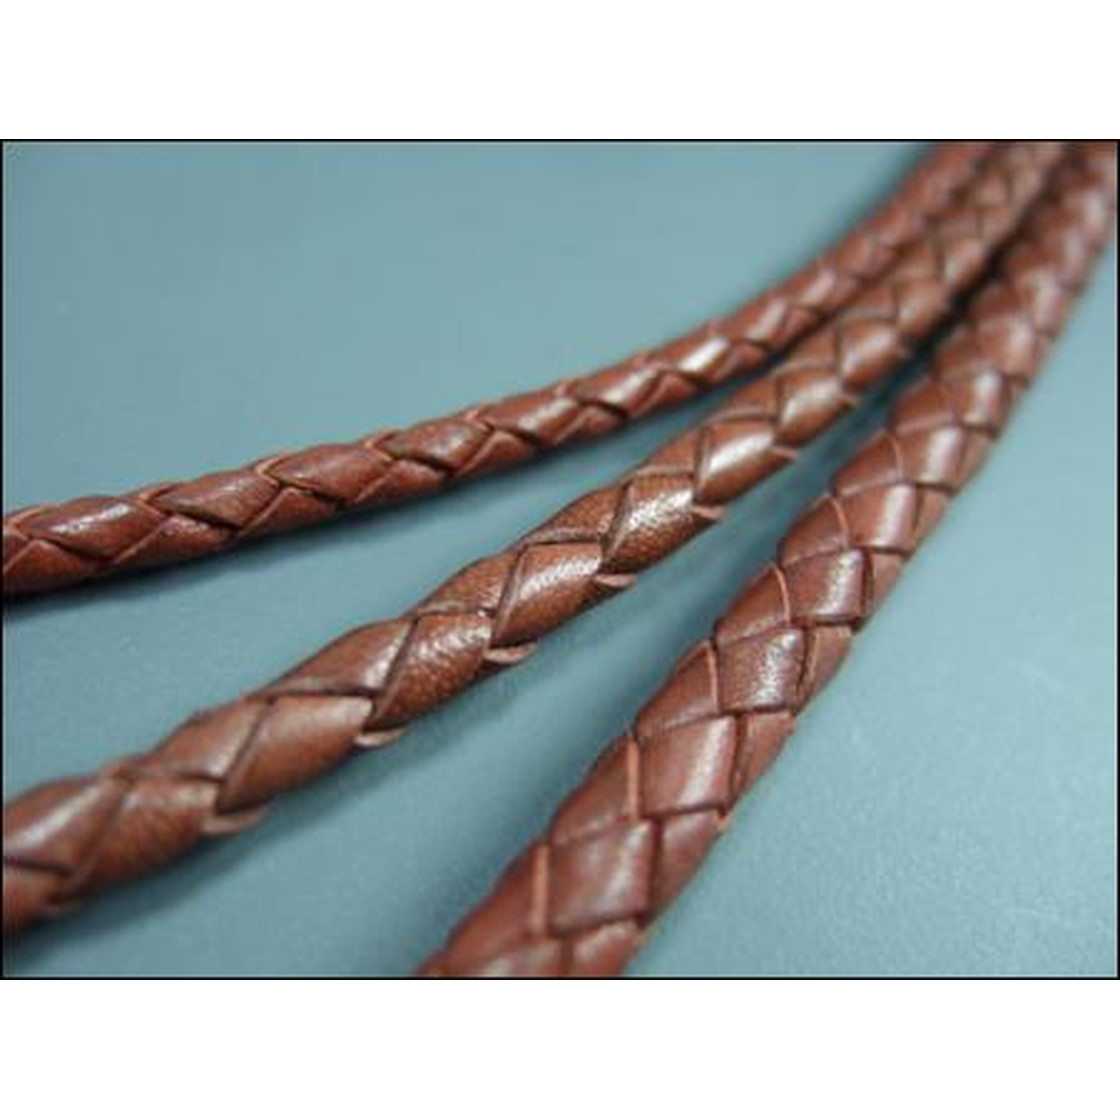 Round braided leather cord Ø2,5mm - saddle brown, 4,60 €